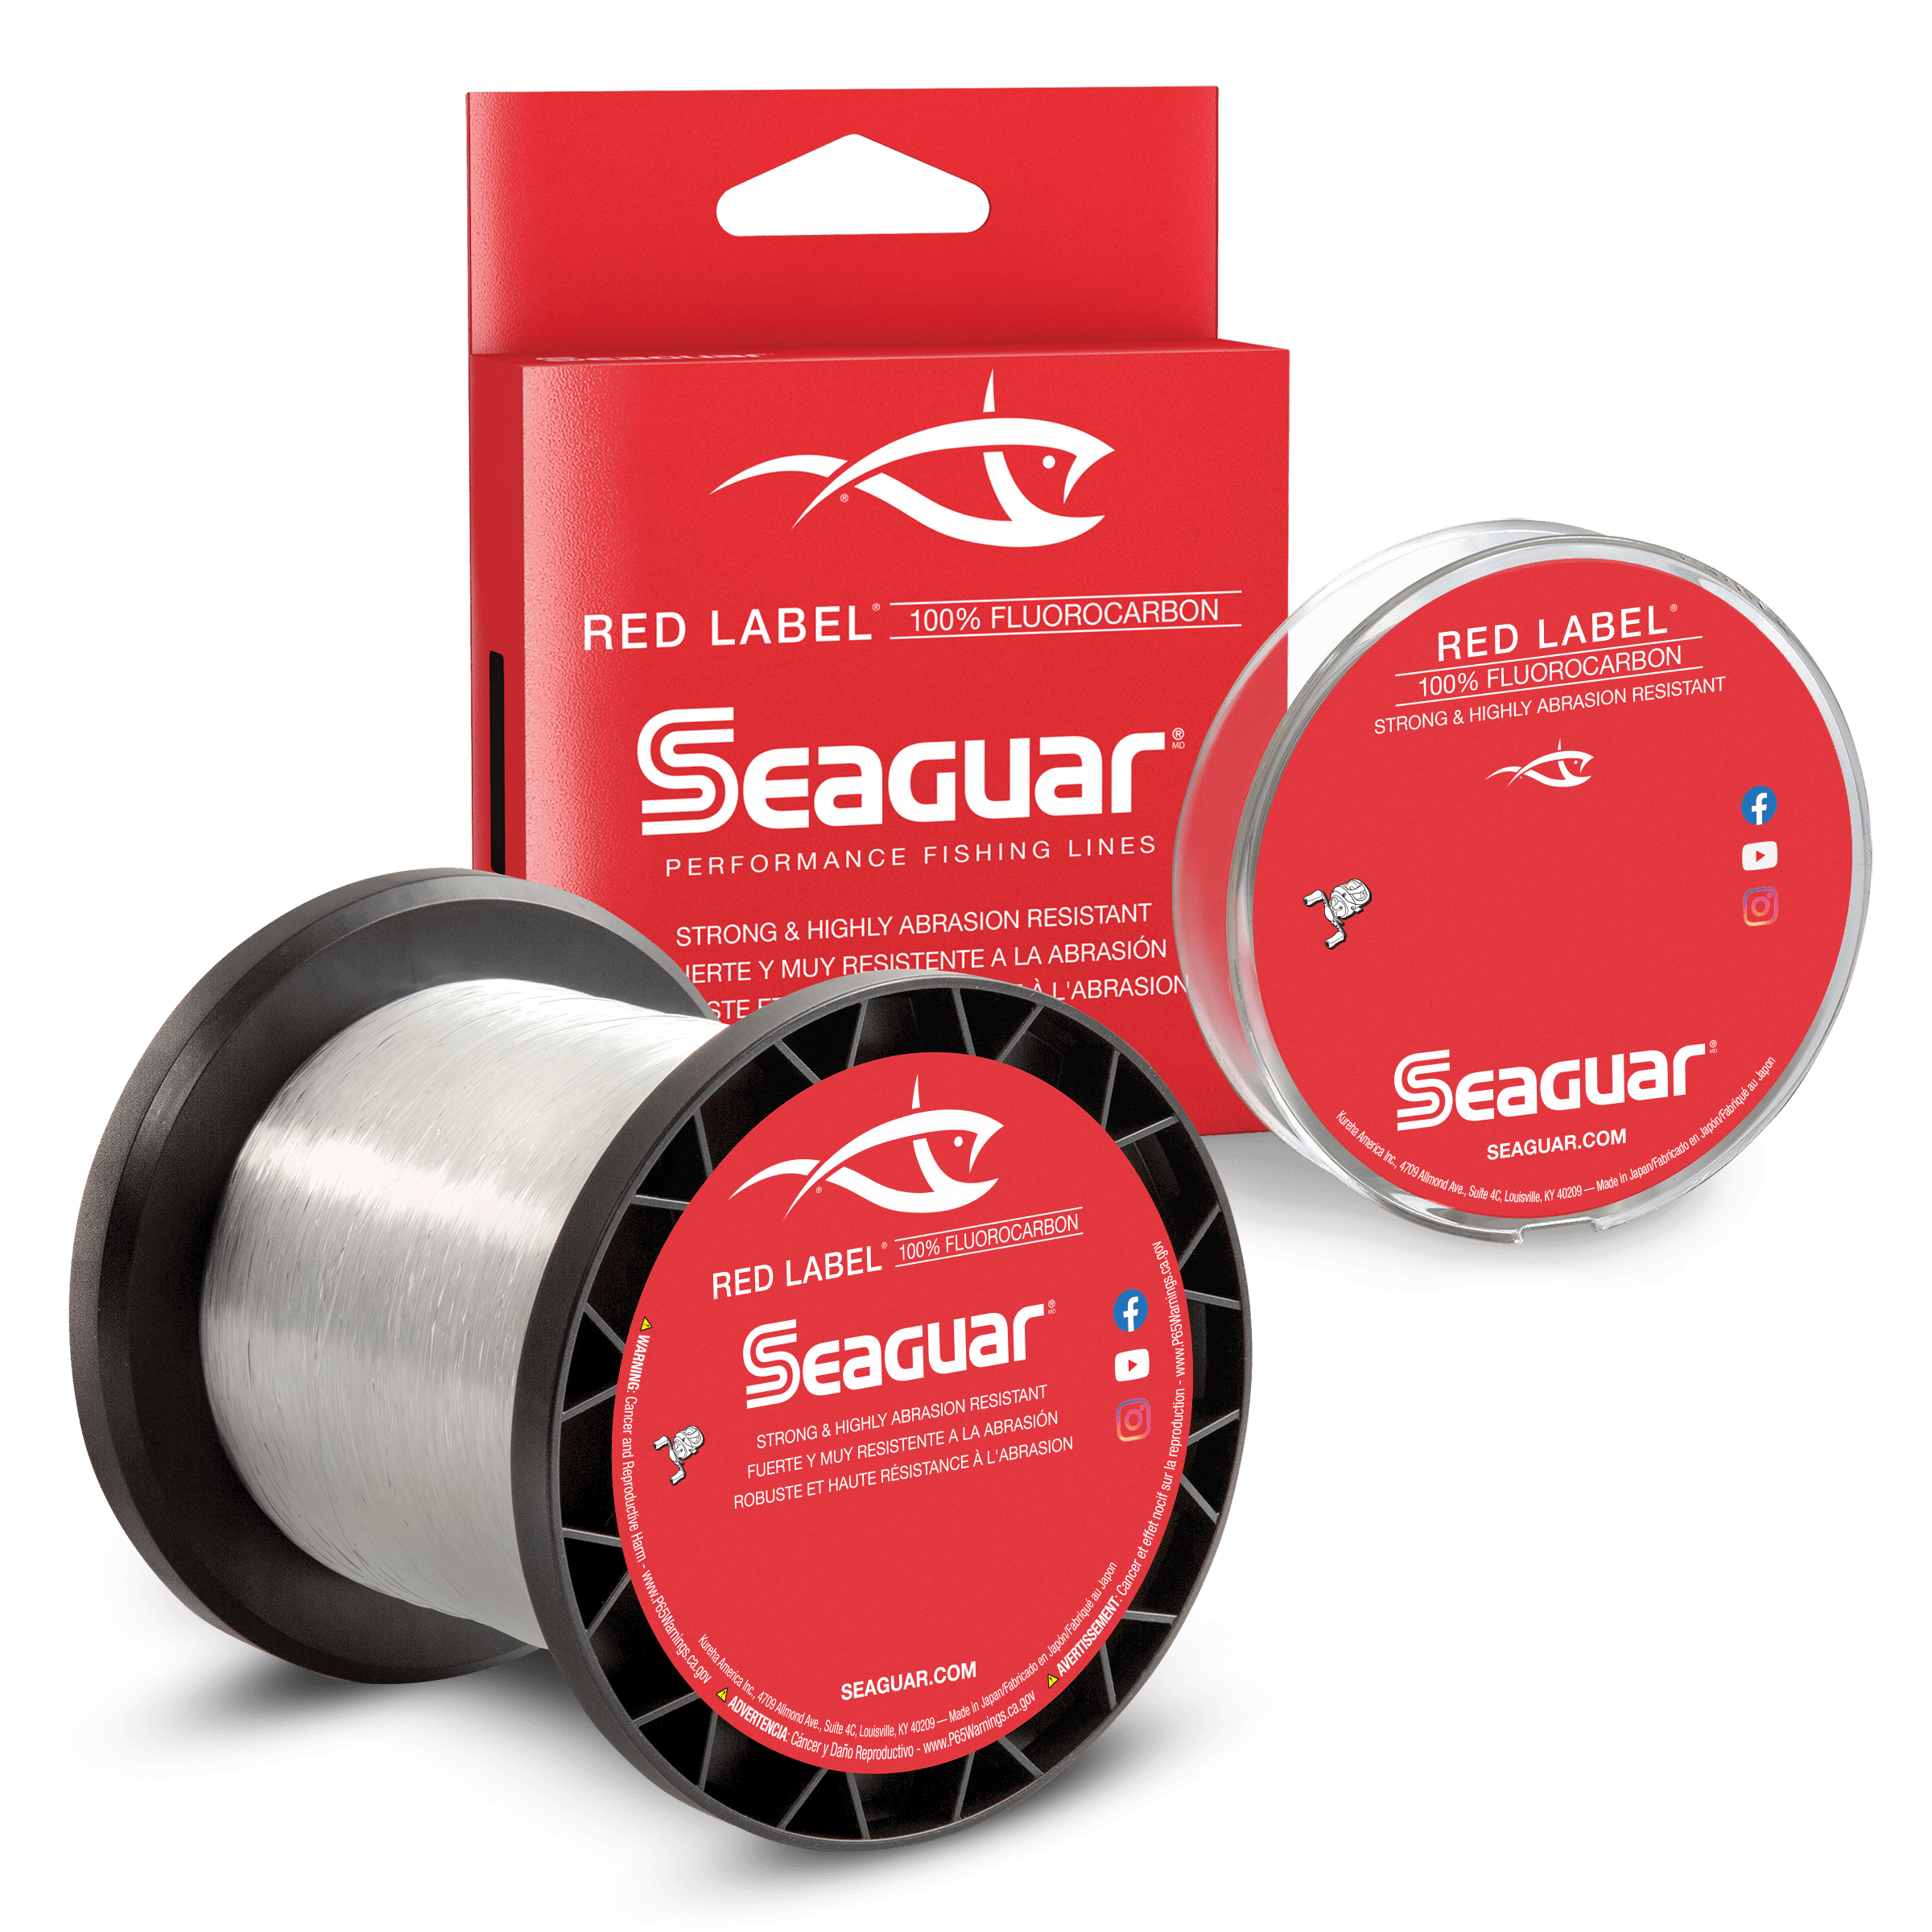 SEAGUAR RED LABEL 100% FLUOROCARBON Fishing Line India